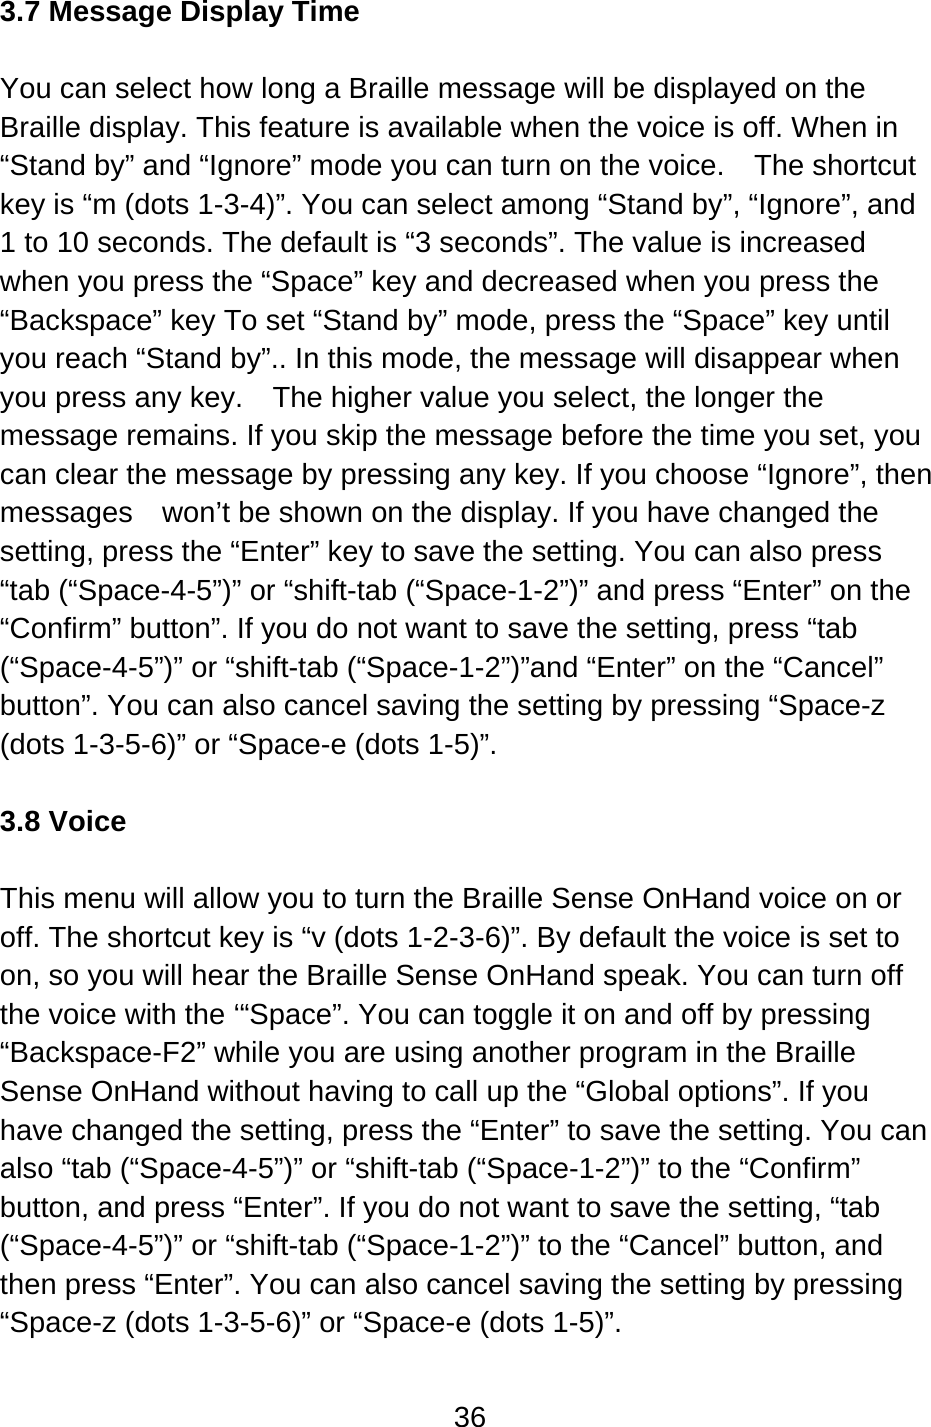 36  3.7 Message Display Time  You can select how long a Braille message will be displayed on the Braille display. This feature is available when the voice is off. When in “Stand by” and “Ignore” mode you can turn on the voice.    The shortcut key is “m (dots 1-3-4)”. You can select among “Stand by”, “Ignore”, and 1 to 10 seconds. The default is “3 seconds”. The value is increased when you press the “Space” key and decreased when you press the “Backspace” key To set “Stand by” mode, press the “Space” key until you reach “Stand by”.. In this mode, the message will disappear when you press any key.    The higher value you select, the longer the message remains. If you skip the message before the time you set, you can clear the message by pressing any key. If you choose “Ignore”, then messages    won’t be shown on the display. If you have changed the setting, press the “Enter” key to save the setting. You can also press “tab (“Space-4-5”)” or “shift-tab (“Space-1-2”)” and press “Enter” on the “Confirm” button”. If you do not want to save the setting, press “tab (“Space-4-5”)” or “shift-tab (“Space-1-2”)”and “Enter” on the “Cancel” button”. You can also cancel saving the setting by pressing “Space-z (dots 1-3-5-6)” or “Space-e (dots 1-5)”.  3.8 Voice  This menu will allow you to turn the Braille Sense OnHand voice on or off. The shortcut key is “v (dots 1-2-3-6)”. By default the voice is set to on, so you will hear the Braille Sense OnHand speak. You can turn off the voice with the ‘“Space”. You can toggle it on and off by pressing “Backspace-F2” while you are using another program in the Braille Sense OnHand without having to call up the “Global options”. If you have changed the setting, press the “Enter” to save the setting. You can also “tab (“Space-4-5”)” or “shift-tab (“Space-1-2”)” to the “Confirm” button, and press “Enter”. If you do not want to save the setting, “tab (“Space-4-5”)” or “shift-tab (“Space-1-2”)” to the “Cancel” button, and then press “Enter”. You can also cancel saving the setting by pressing “Space-z (dots 1-3-5-6)” or “Space-e (dots 1-5)”.  